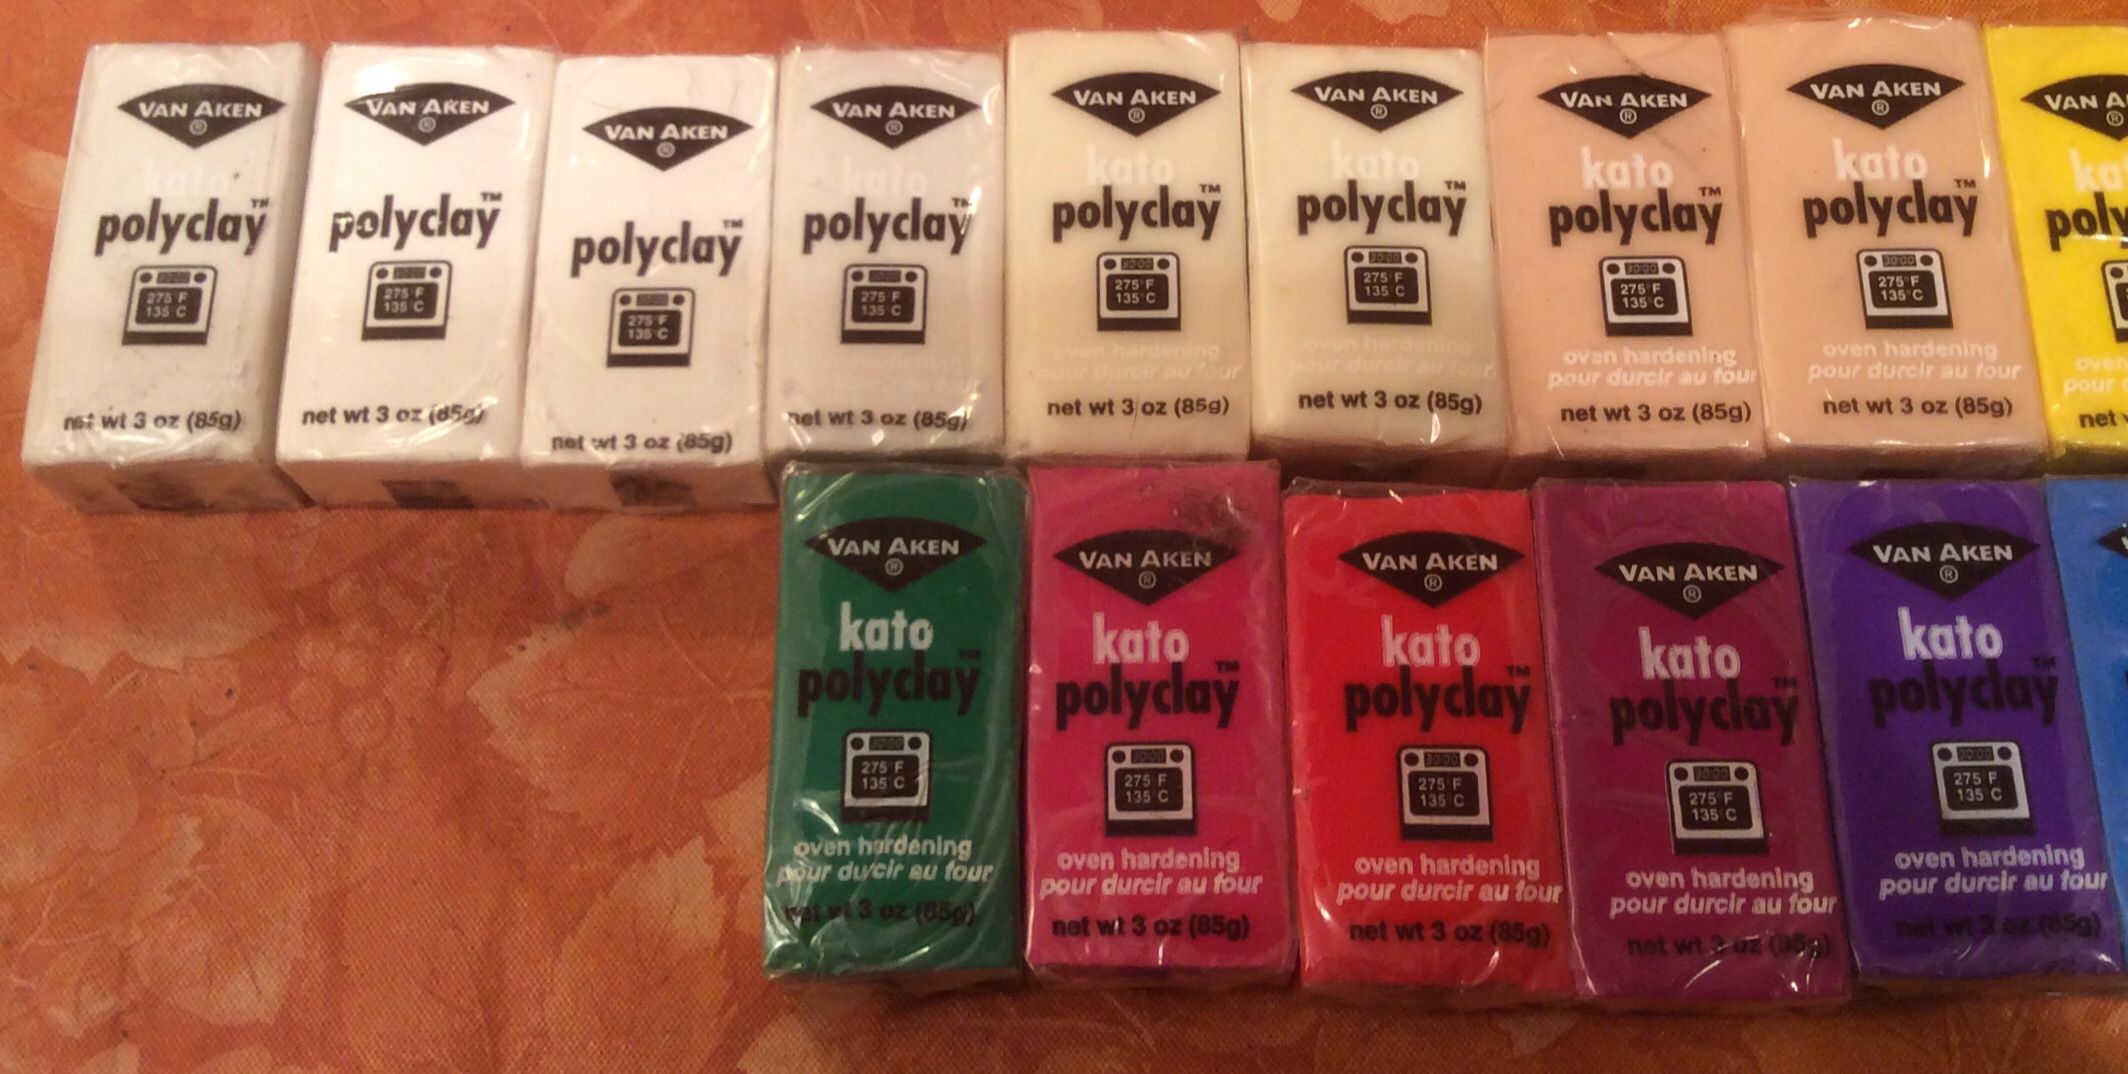 28 New KATO Polyclay Crafting Clay Sculpturing - $40 For All 